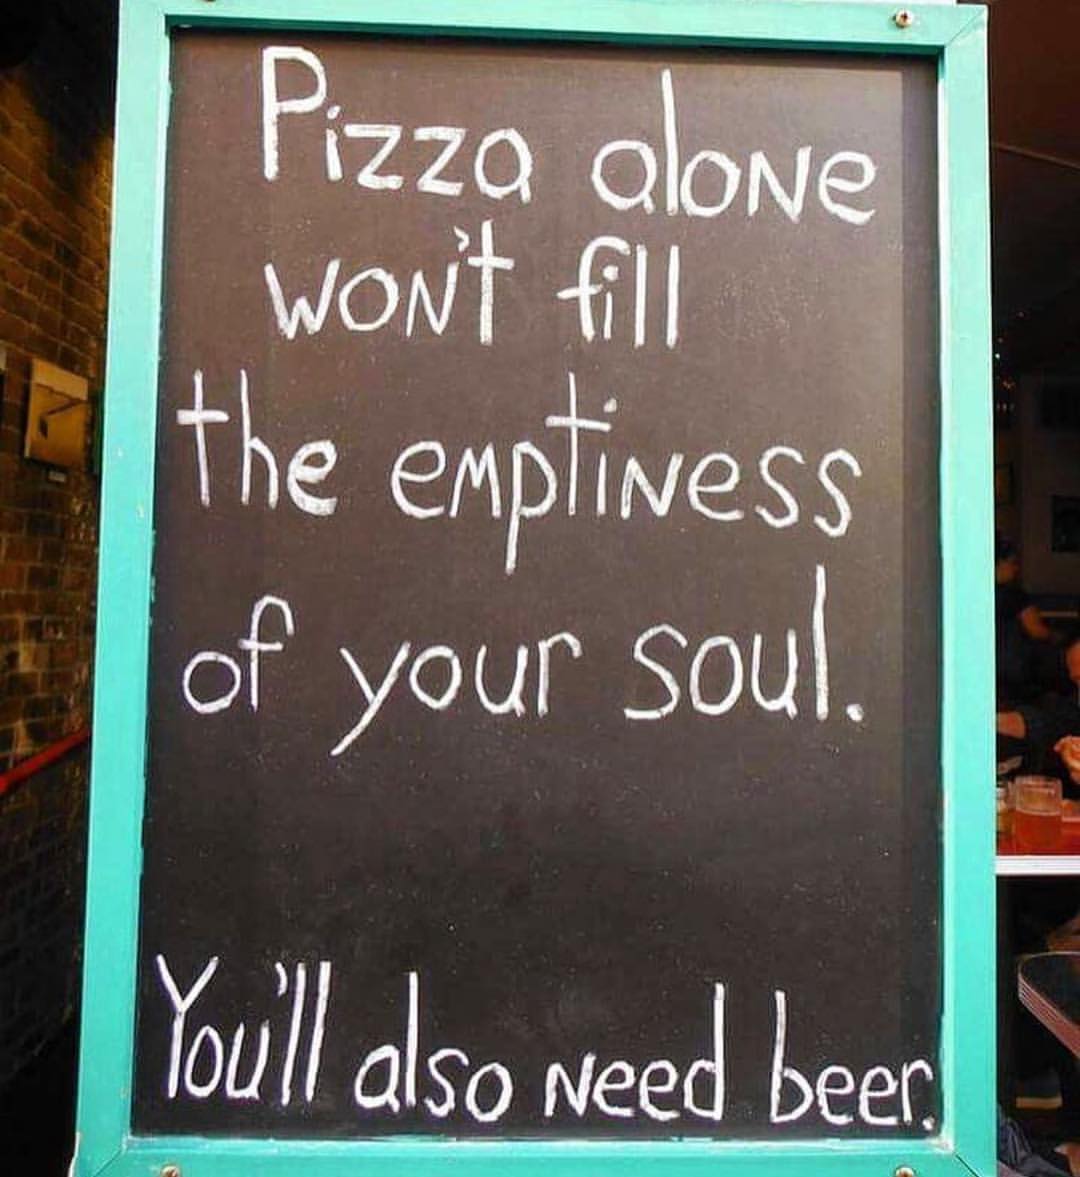 memes - blackboard - Pizza alone Wont fill the emptiness of your soul. You'll also need beer